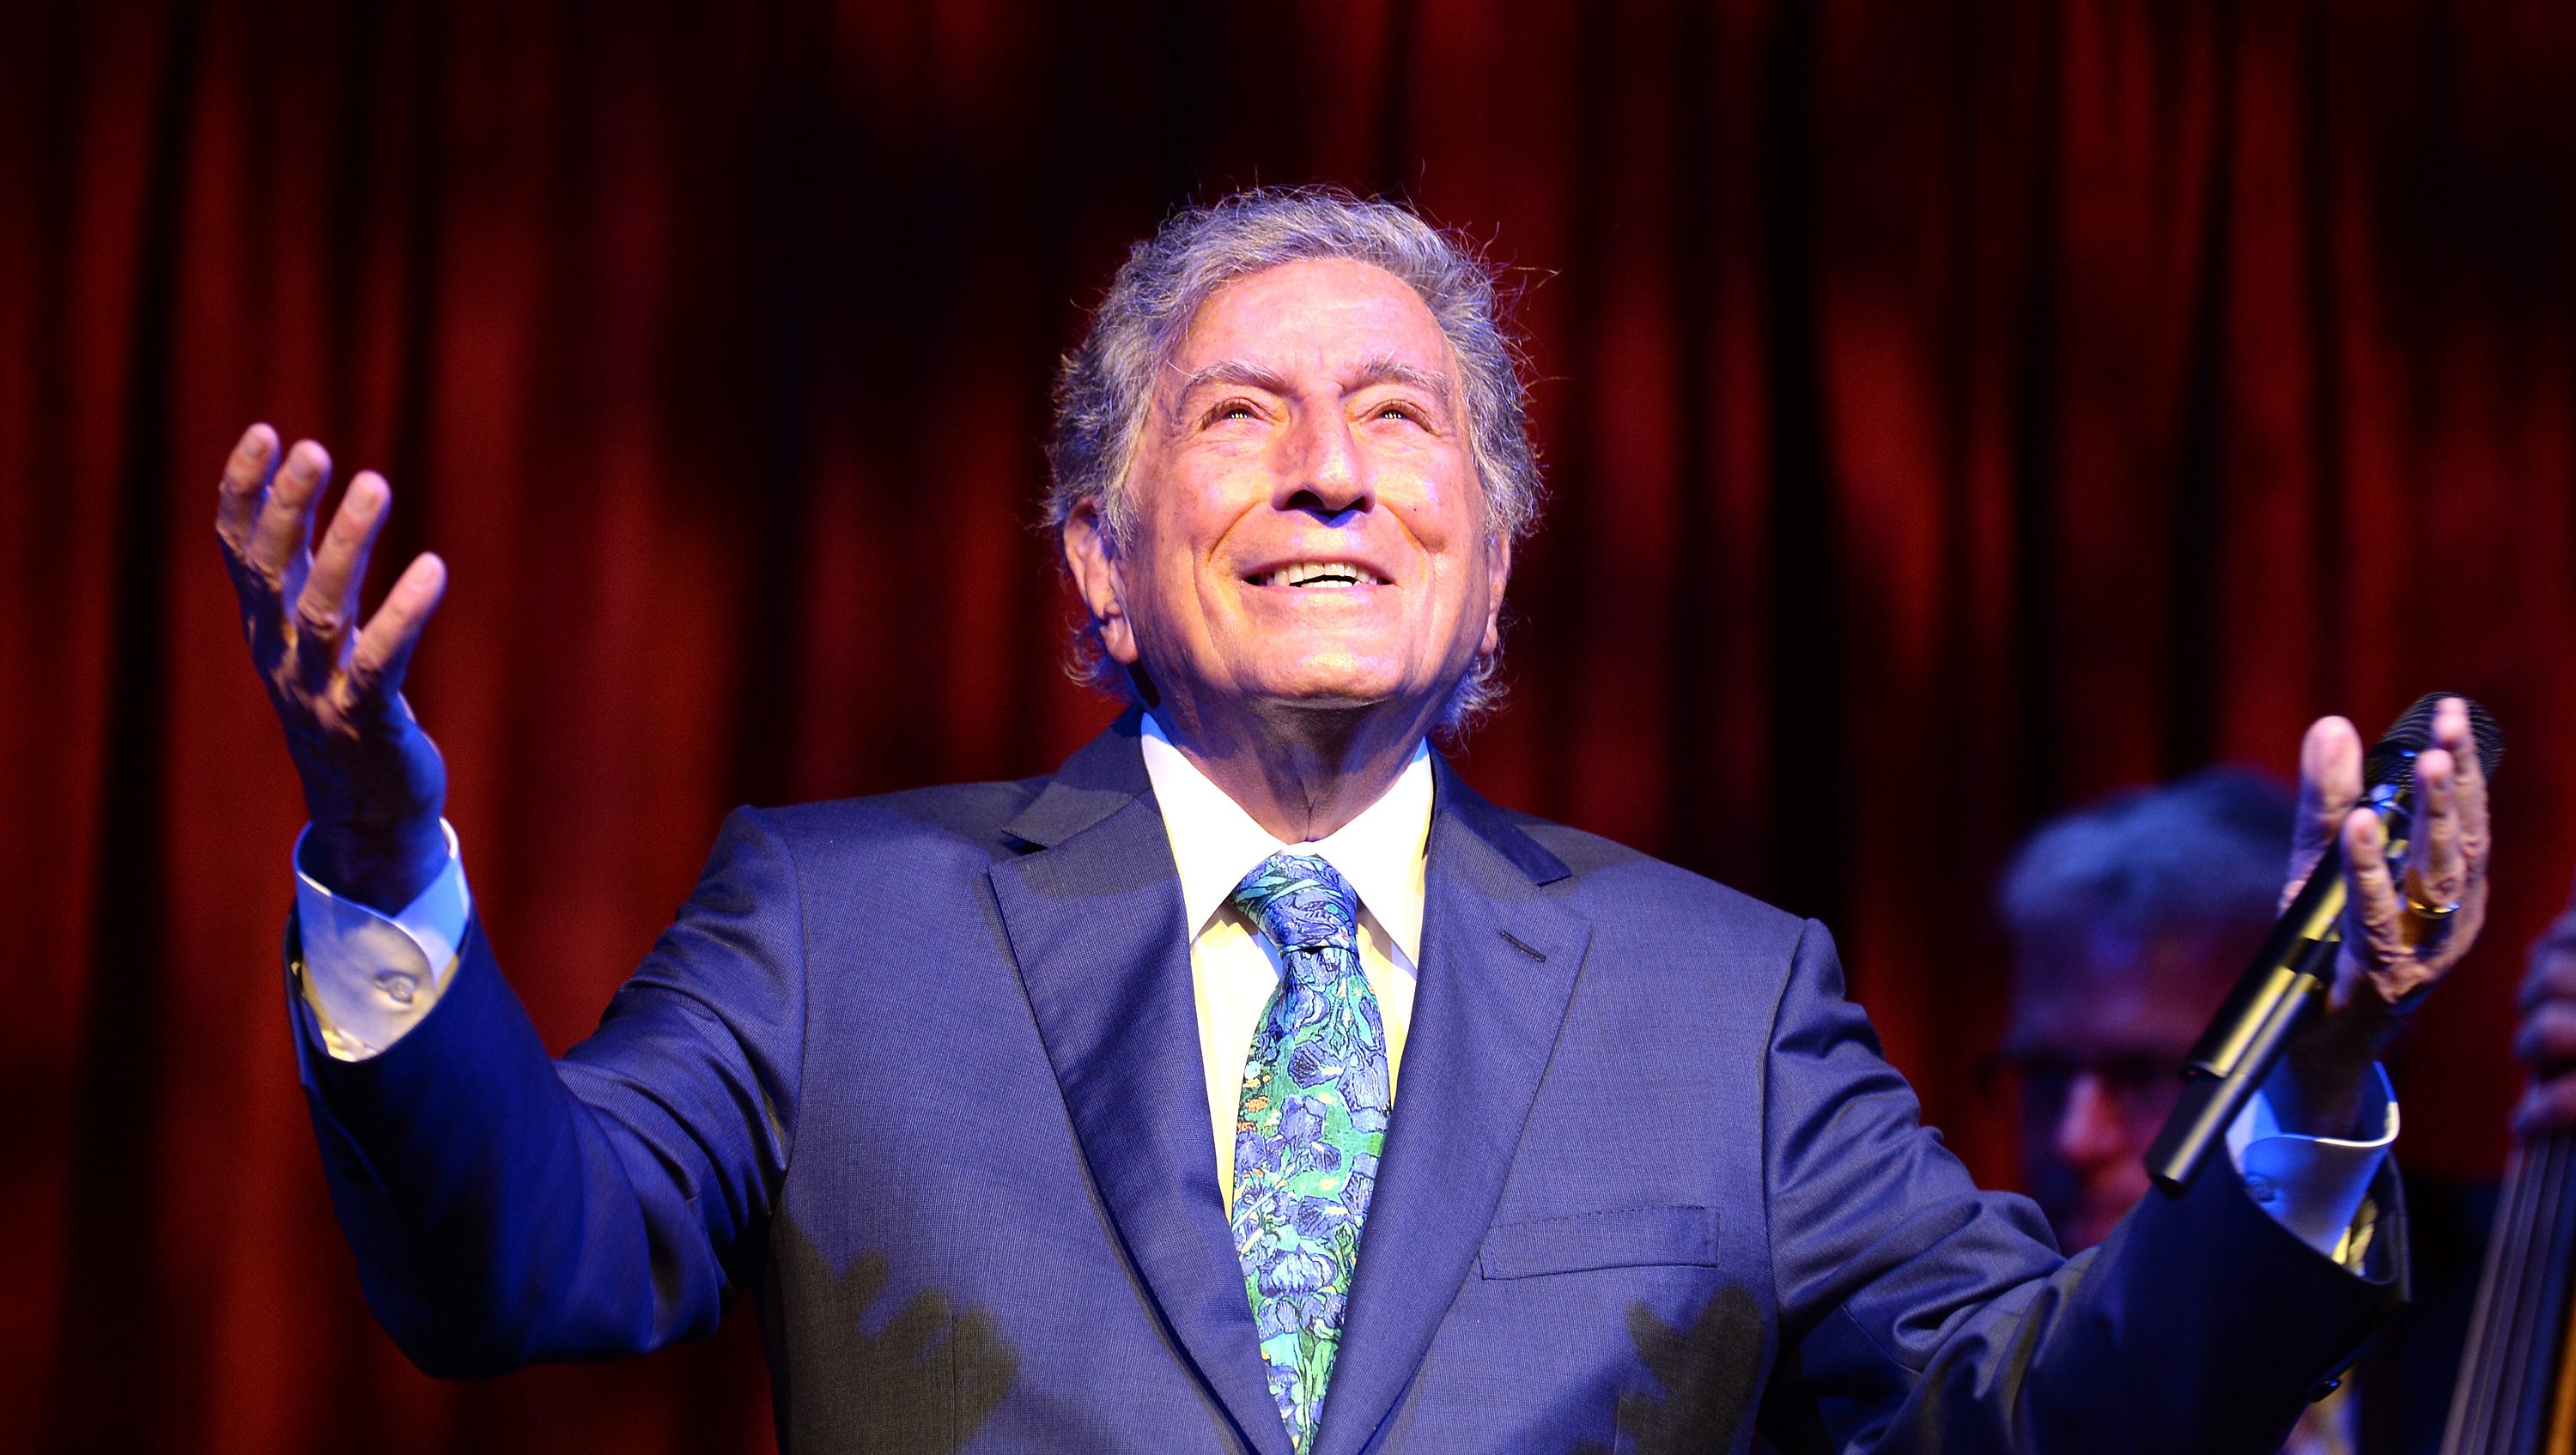 Tony Bennett performs at the 9th Annual Exploring The Arts Gala founded by Tony Bennett and his wife Susan Benedetto at Cipriani 42nd Street on September 28, 2015 in New York City. (Photo by Dave Kotinsky/Getty Images 8th Annual Exploring The Arts Gala)